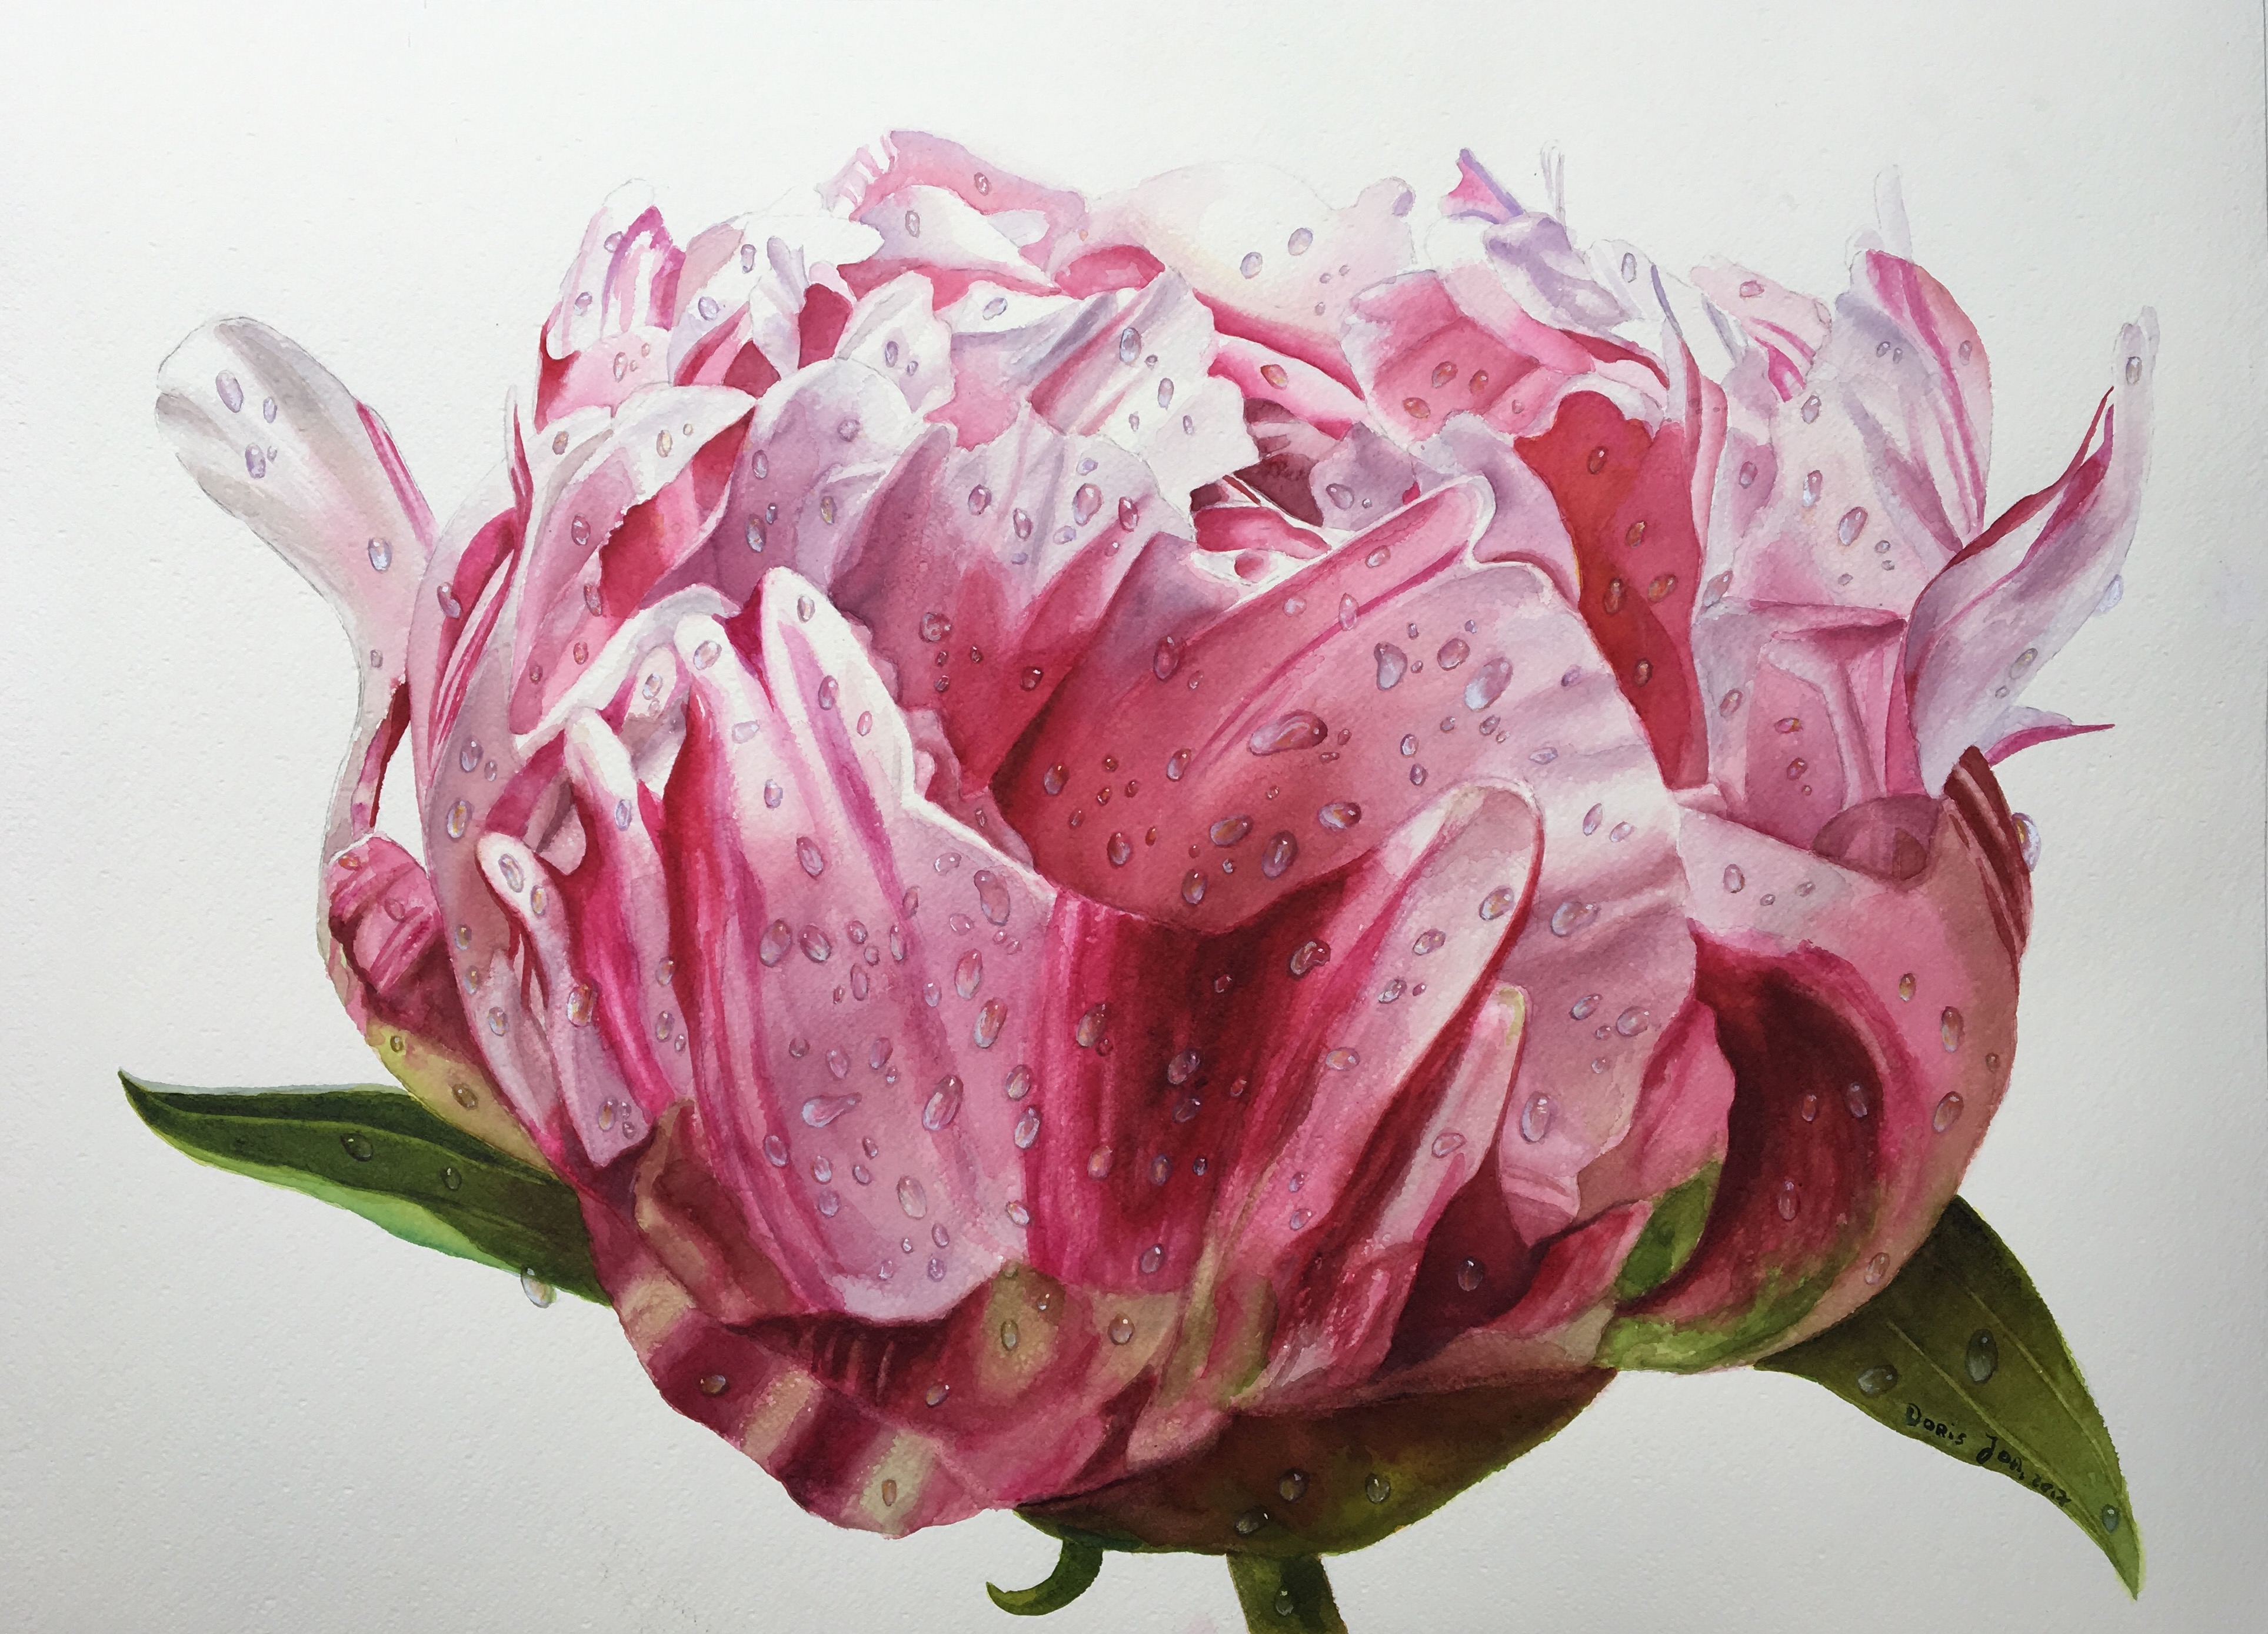 Pink Peony Bud with dewdrops - realistic watercolor paper